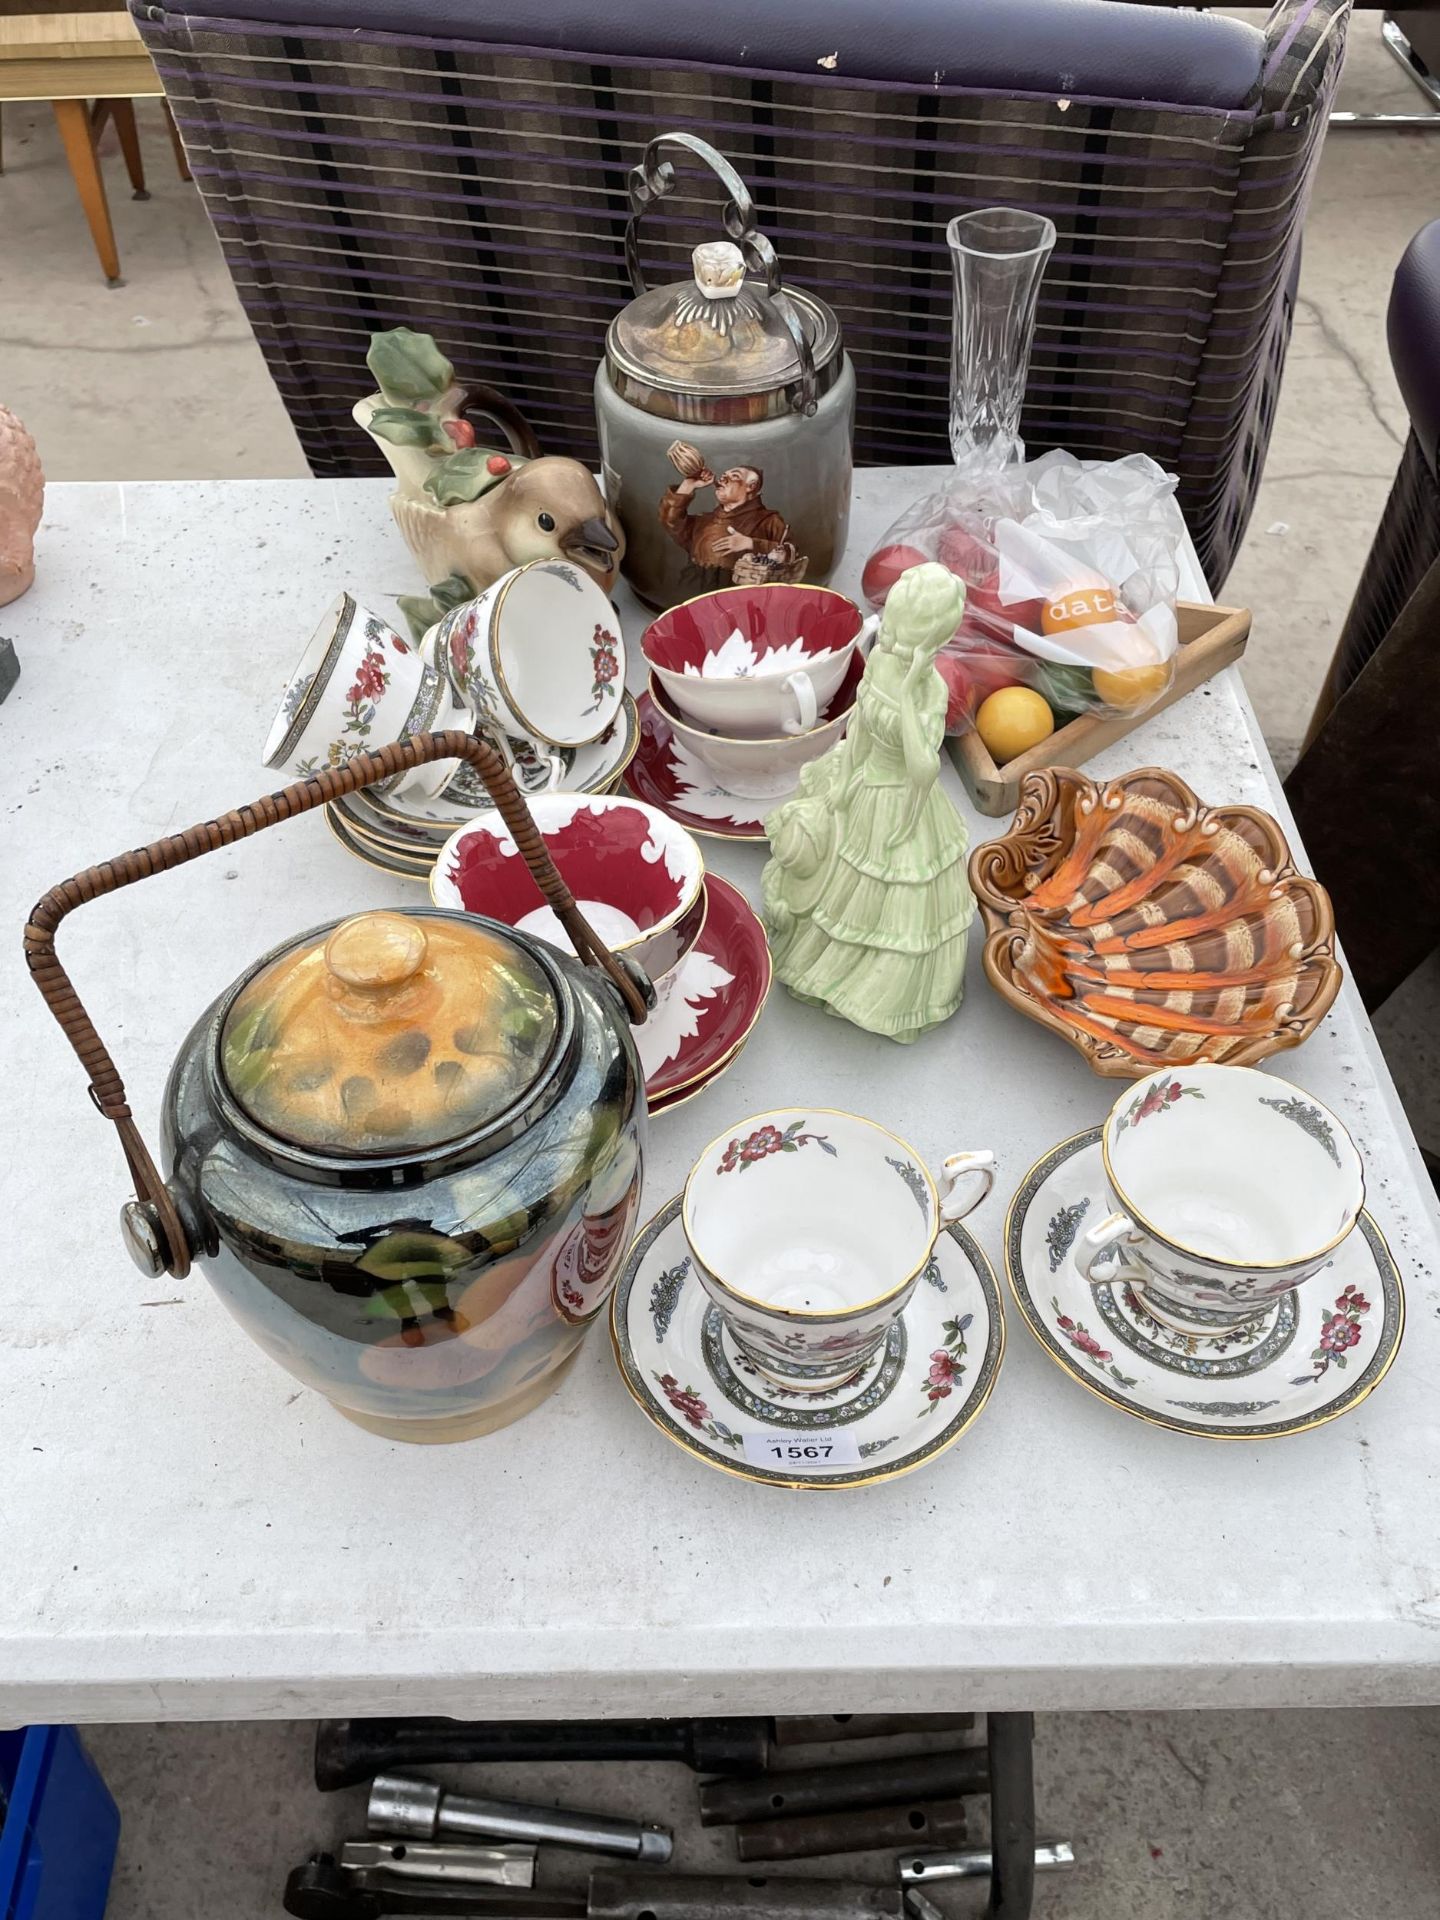 AN ASSORTMENT OF ITEMS TO INCLUDE CERAMIC TEA SERVICE ITEMS, A SNOOKER BALL SET AND A CERAMIC